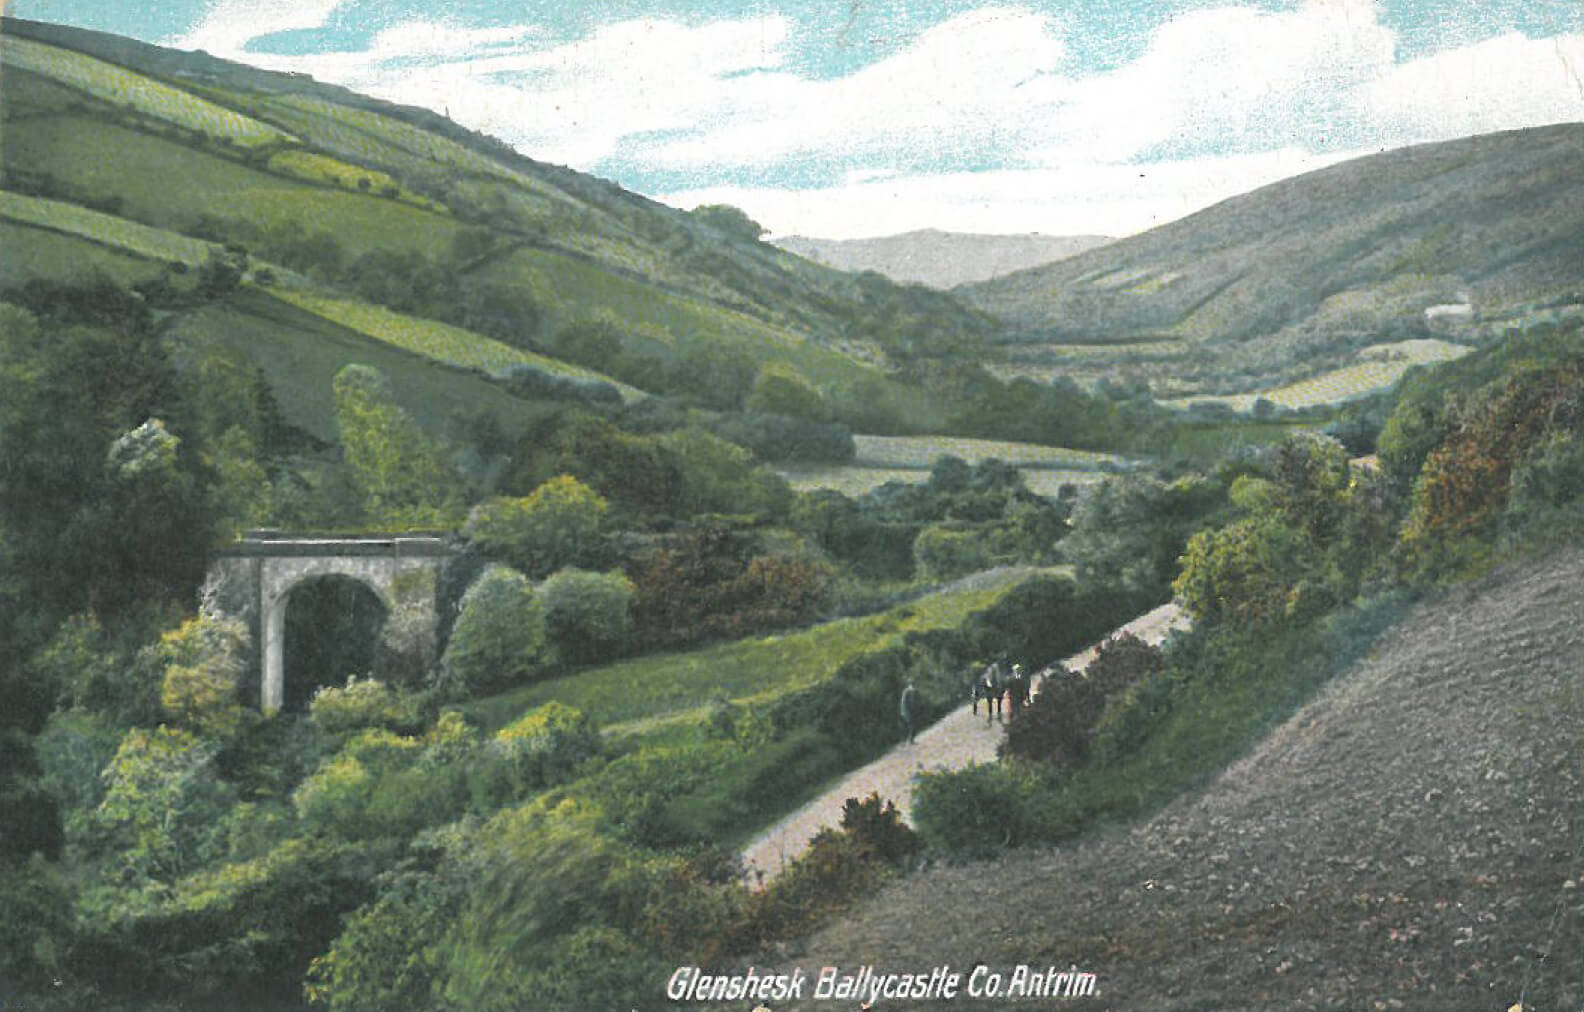 Old postcard showing the 